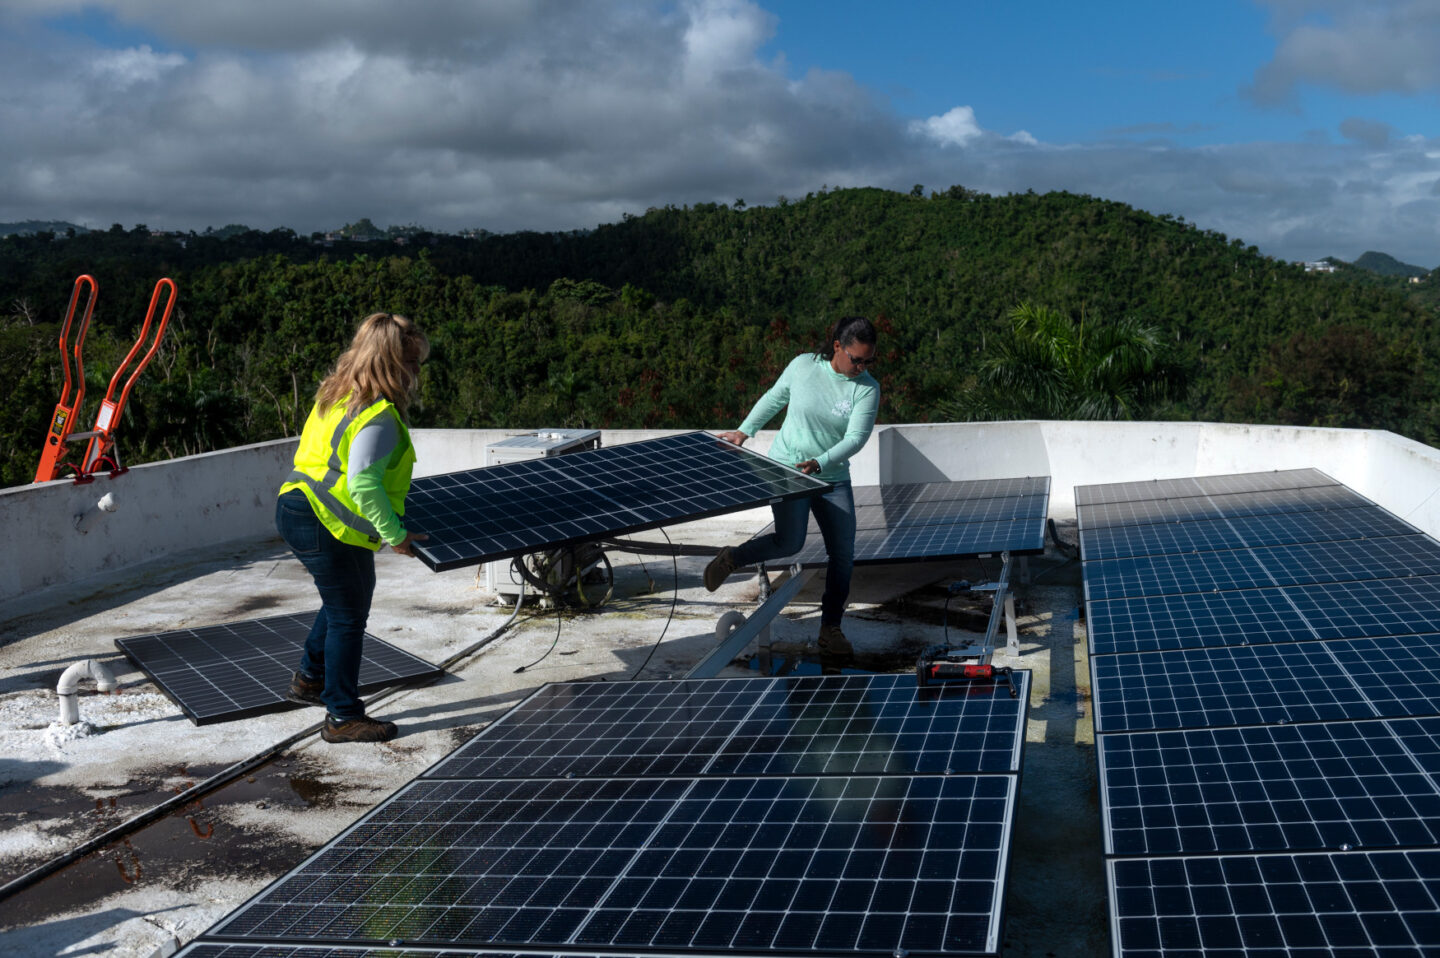 Workers install a solar panel on the roof of a house in Puerto Rico